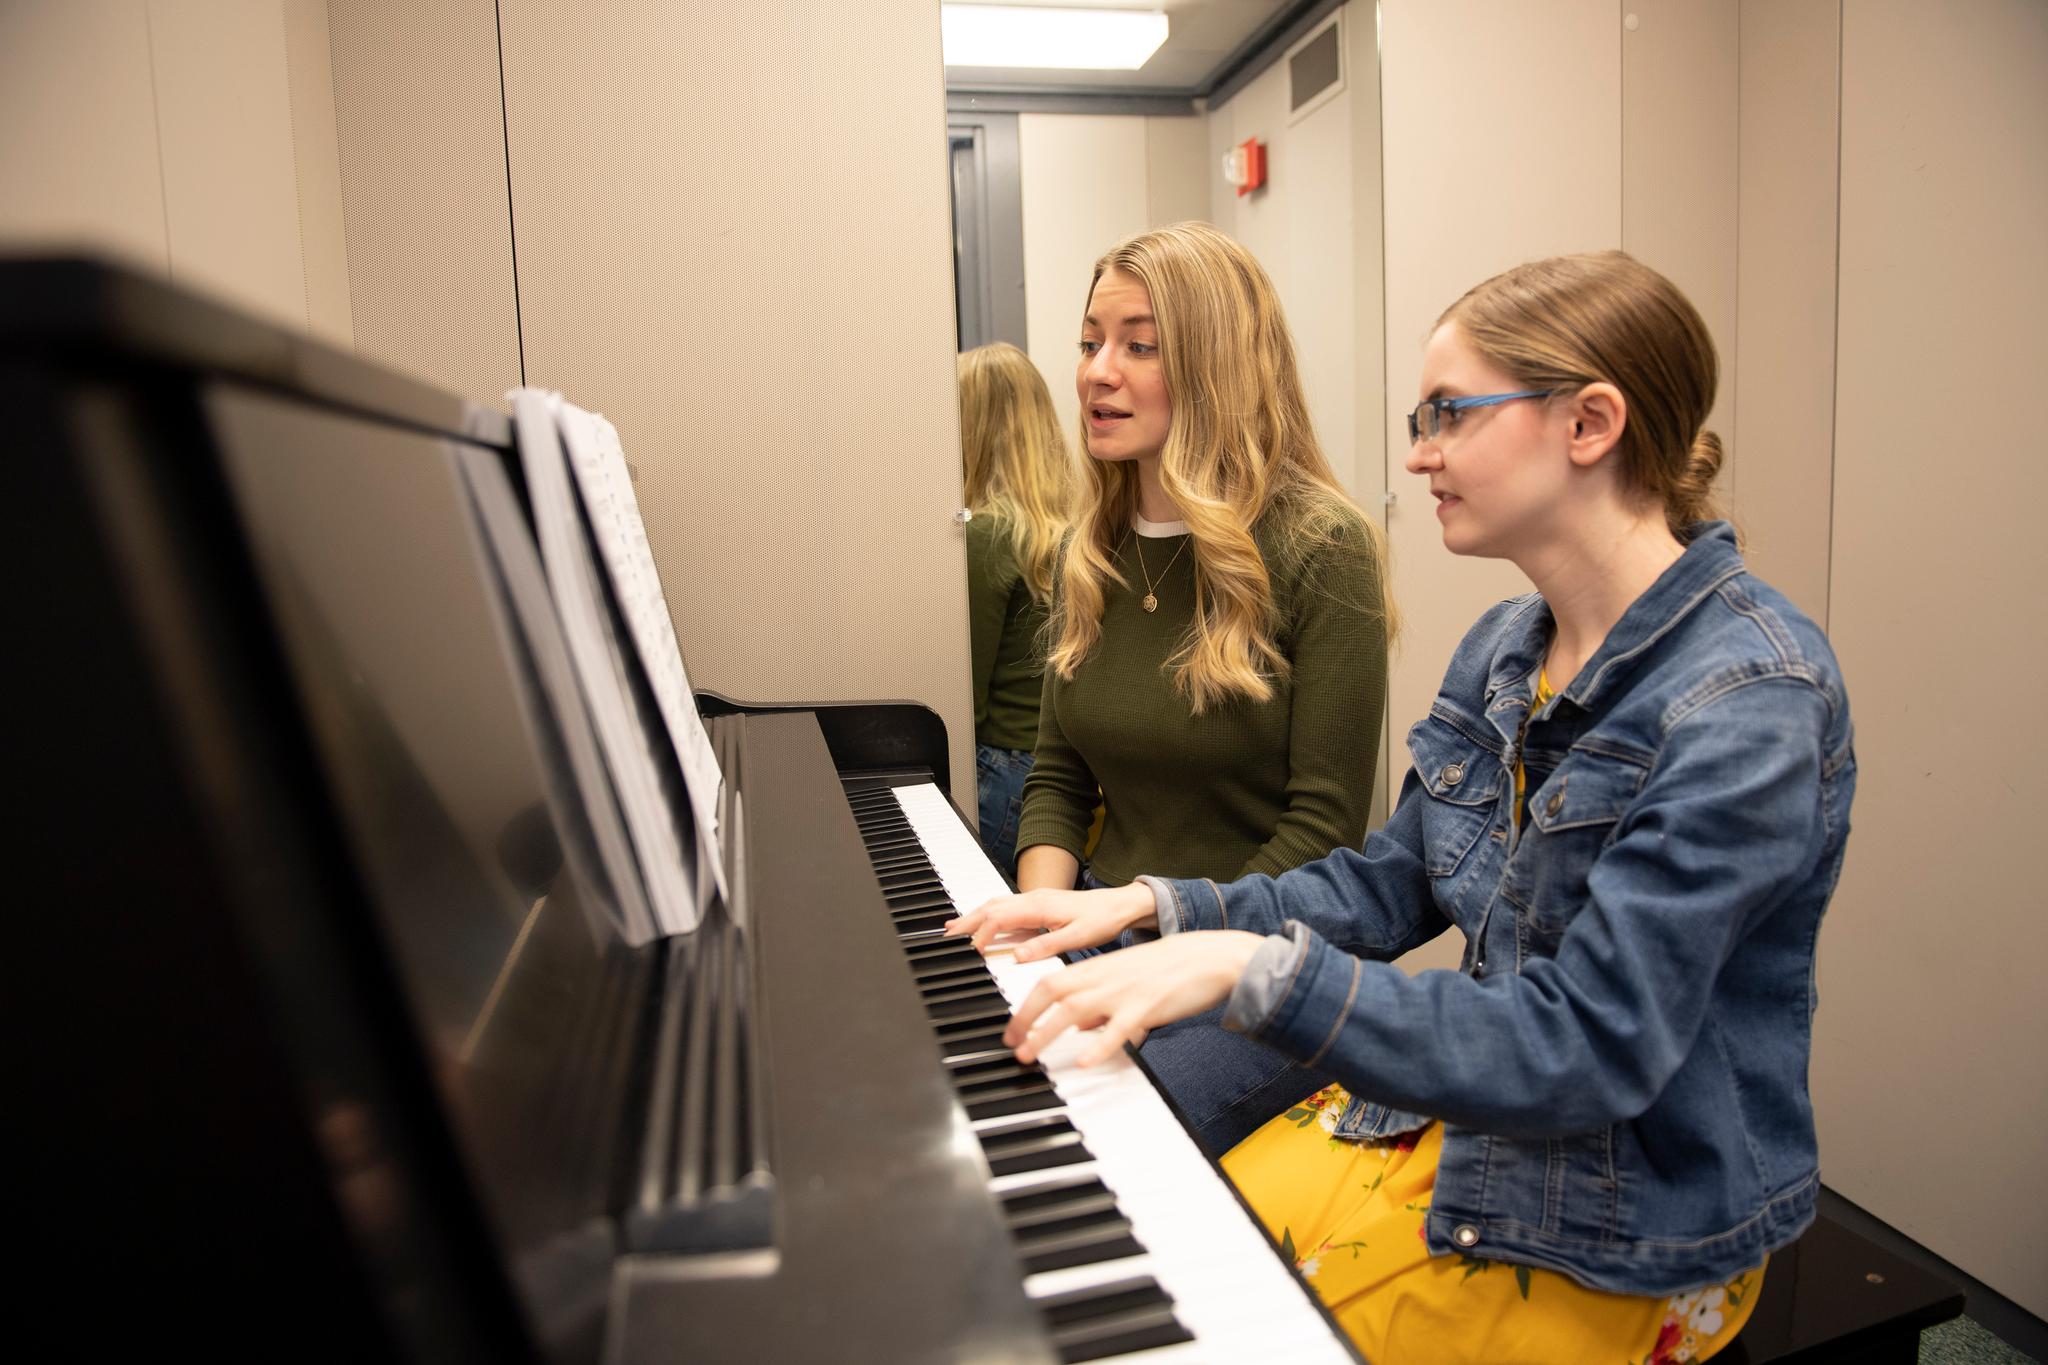 Cedarville University’s new songwriting minor will focus on the songwriting process and develop a critical analysis and application of theology in lyrics.